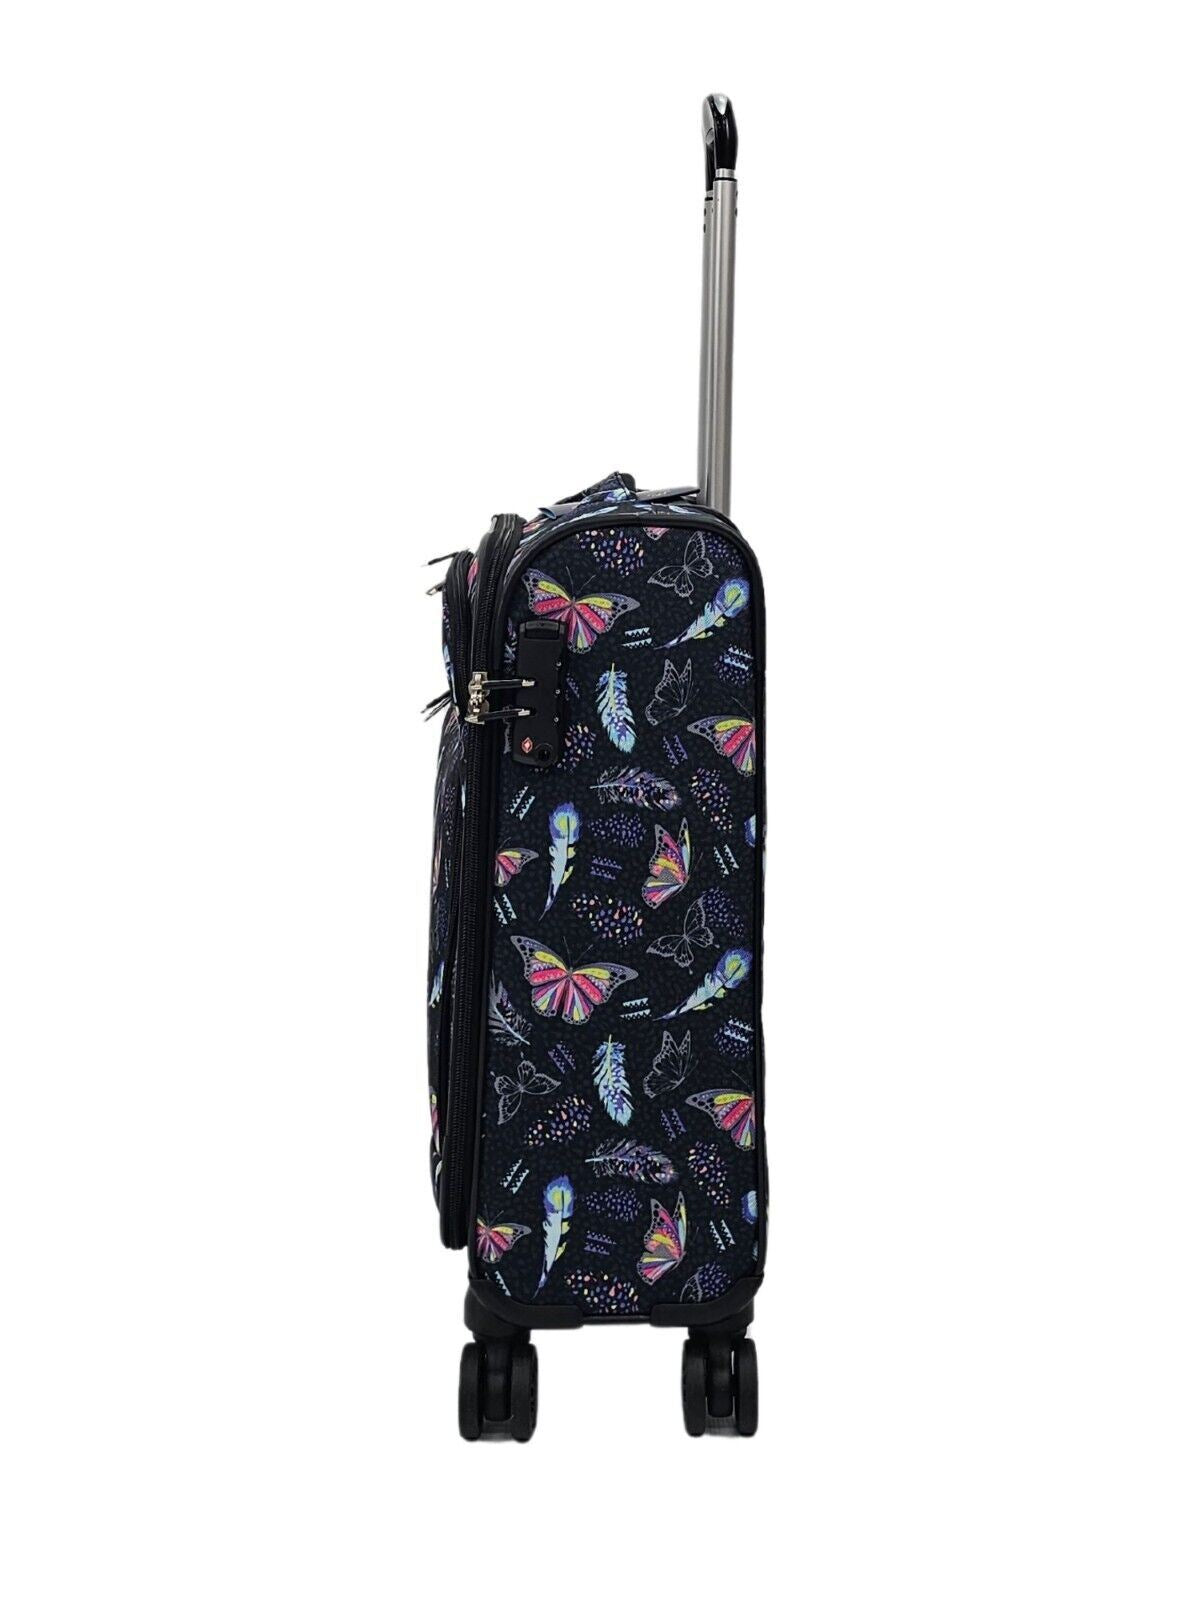 Lightweight Suitcases 8 Wheel Luggage Butterfly Travel Soft Bags - Upperclass Fashions 